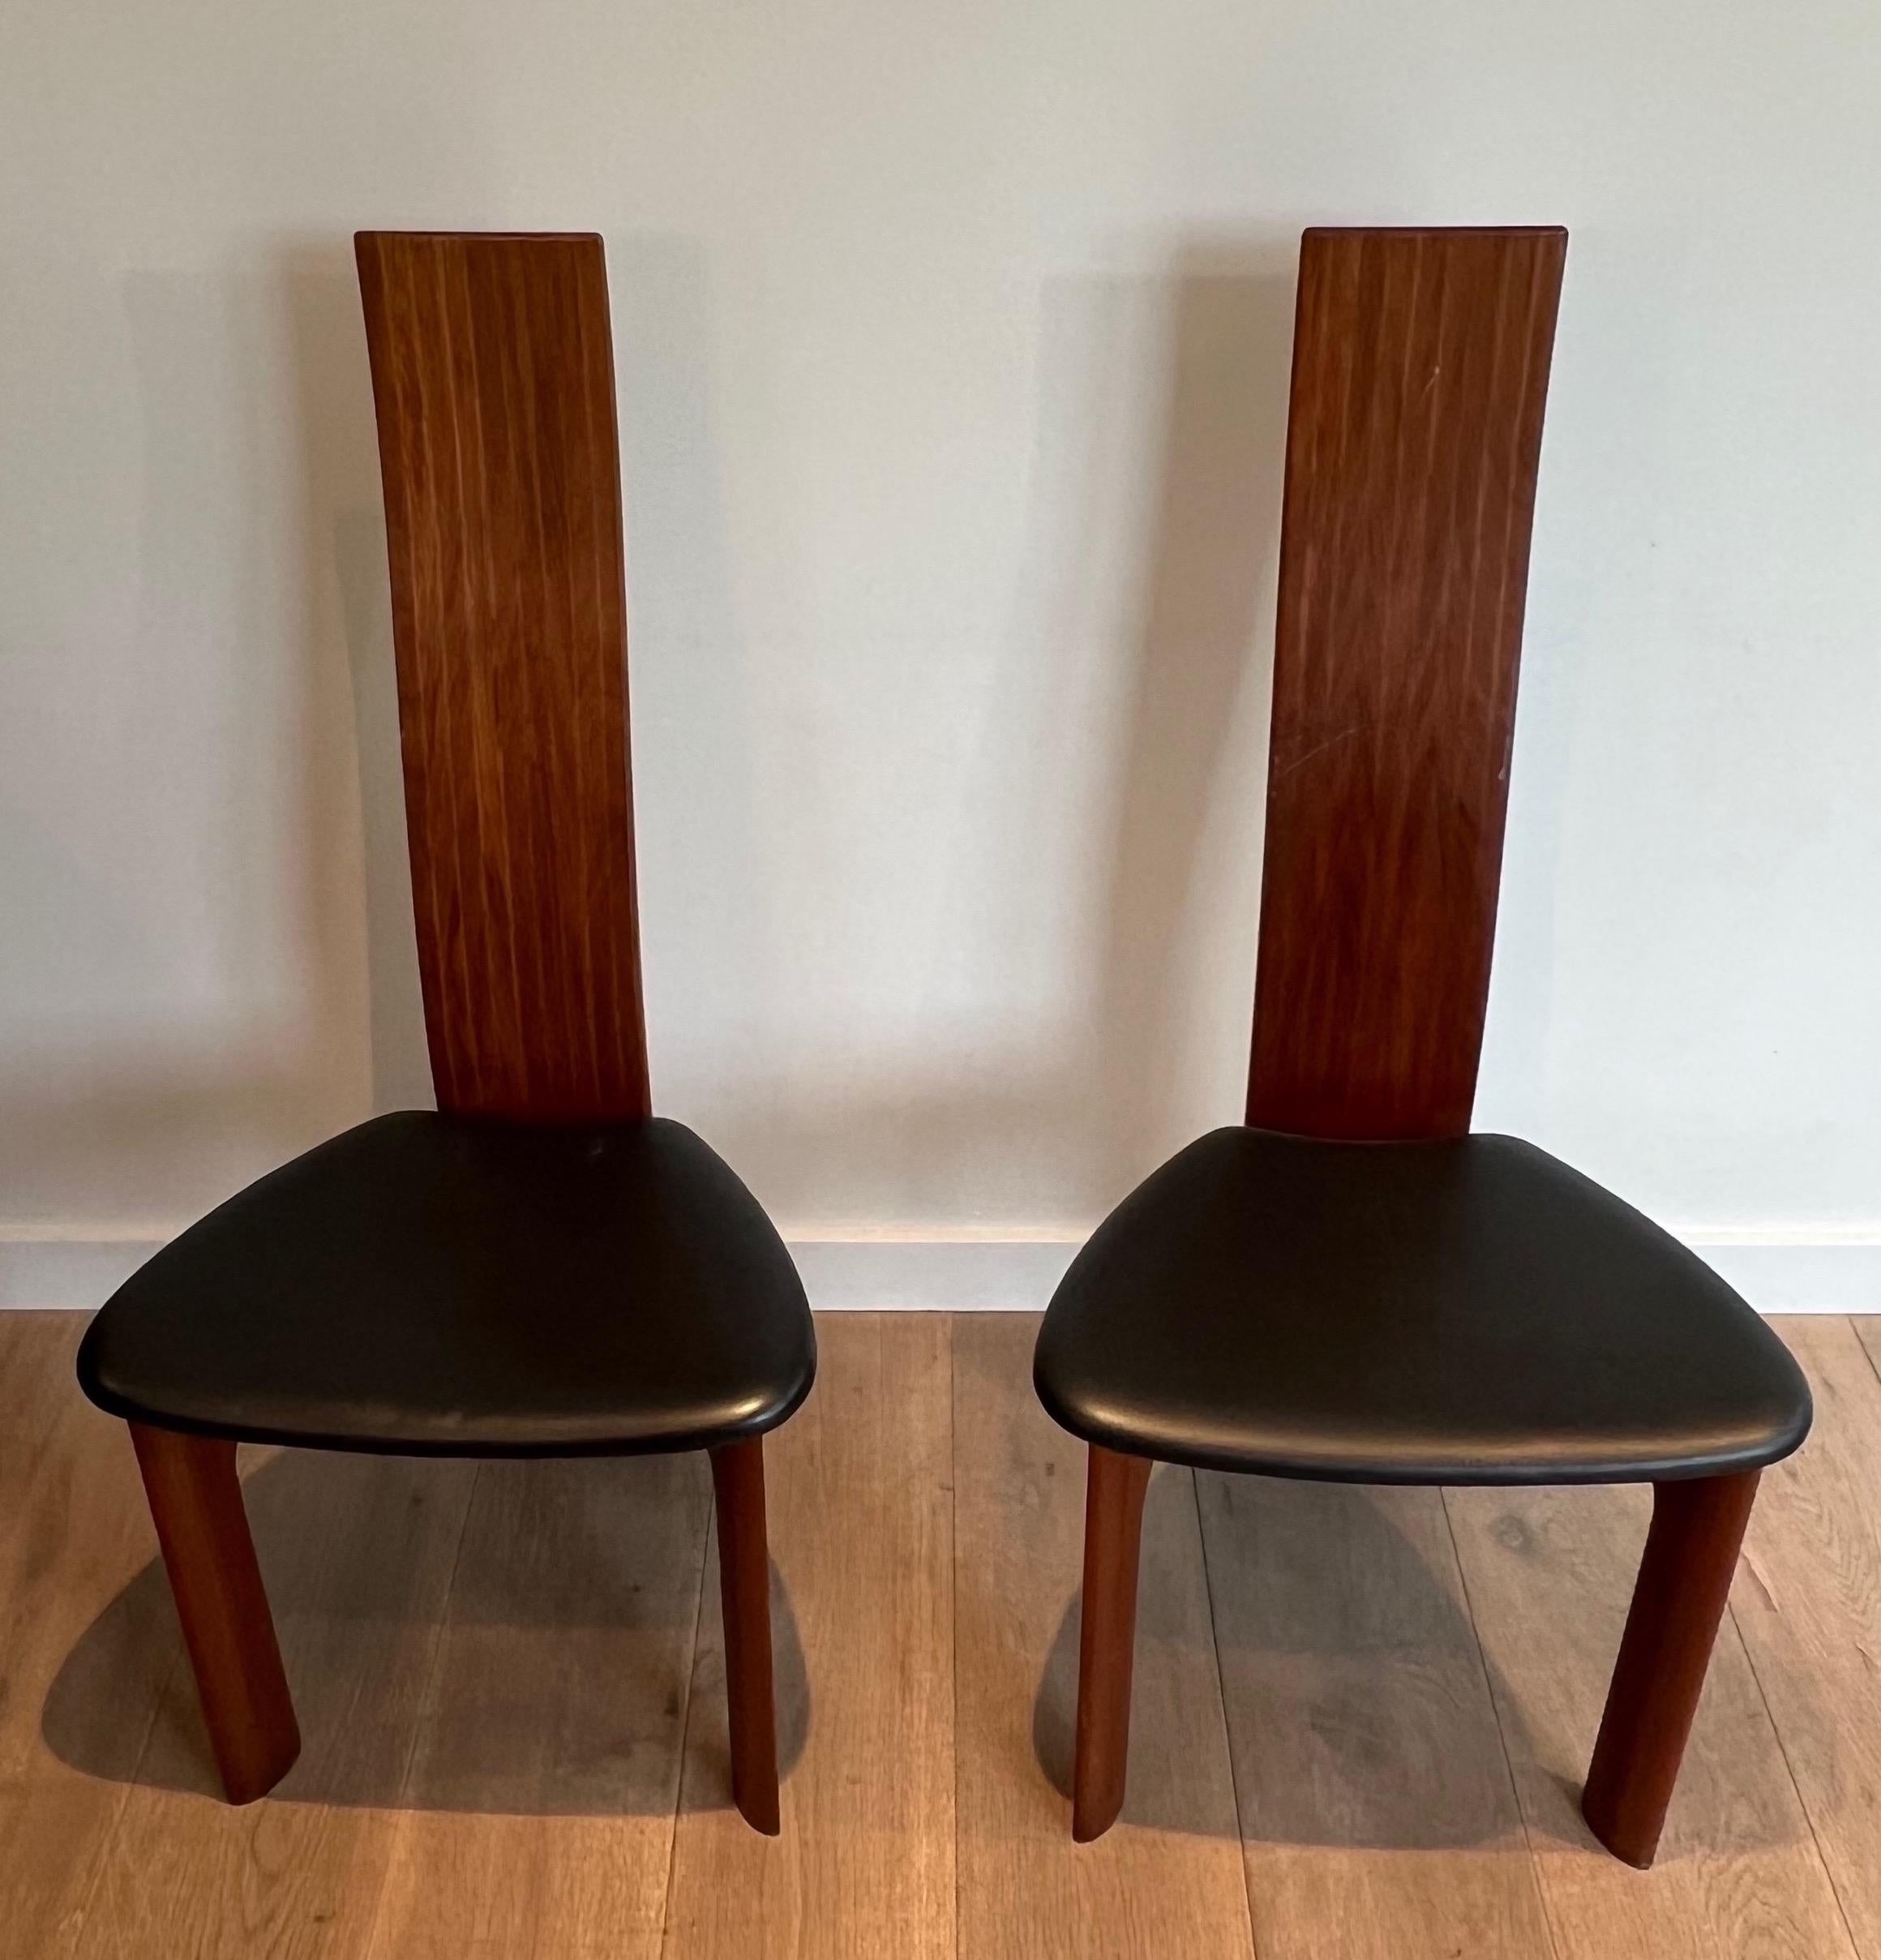 Pair of Exotic Wood and Black Leather Chairs, Scandinavian Work. Circa 1970 For Sale 12